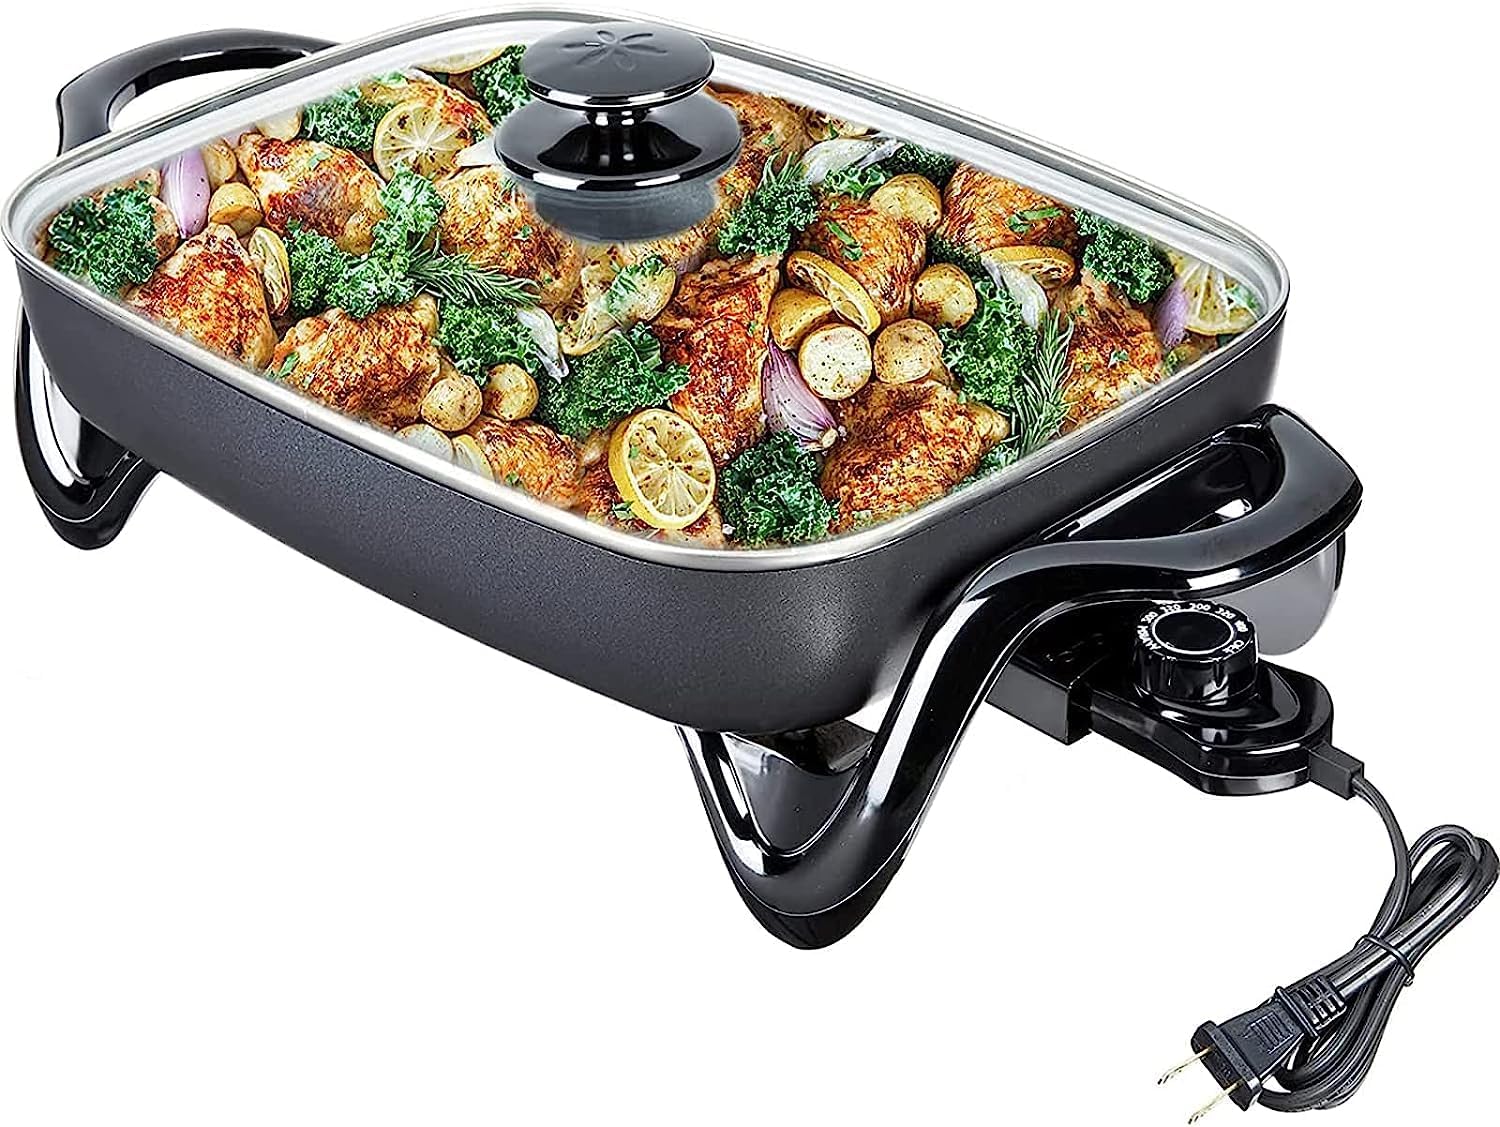 16-Inch Large Electric Skillet Nonstick with Glass Lid, Serves 6 to 8 People (10-Quart), Frying Pan for Roast, Bake,Stew, Adjustable Temperature Control, Black